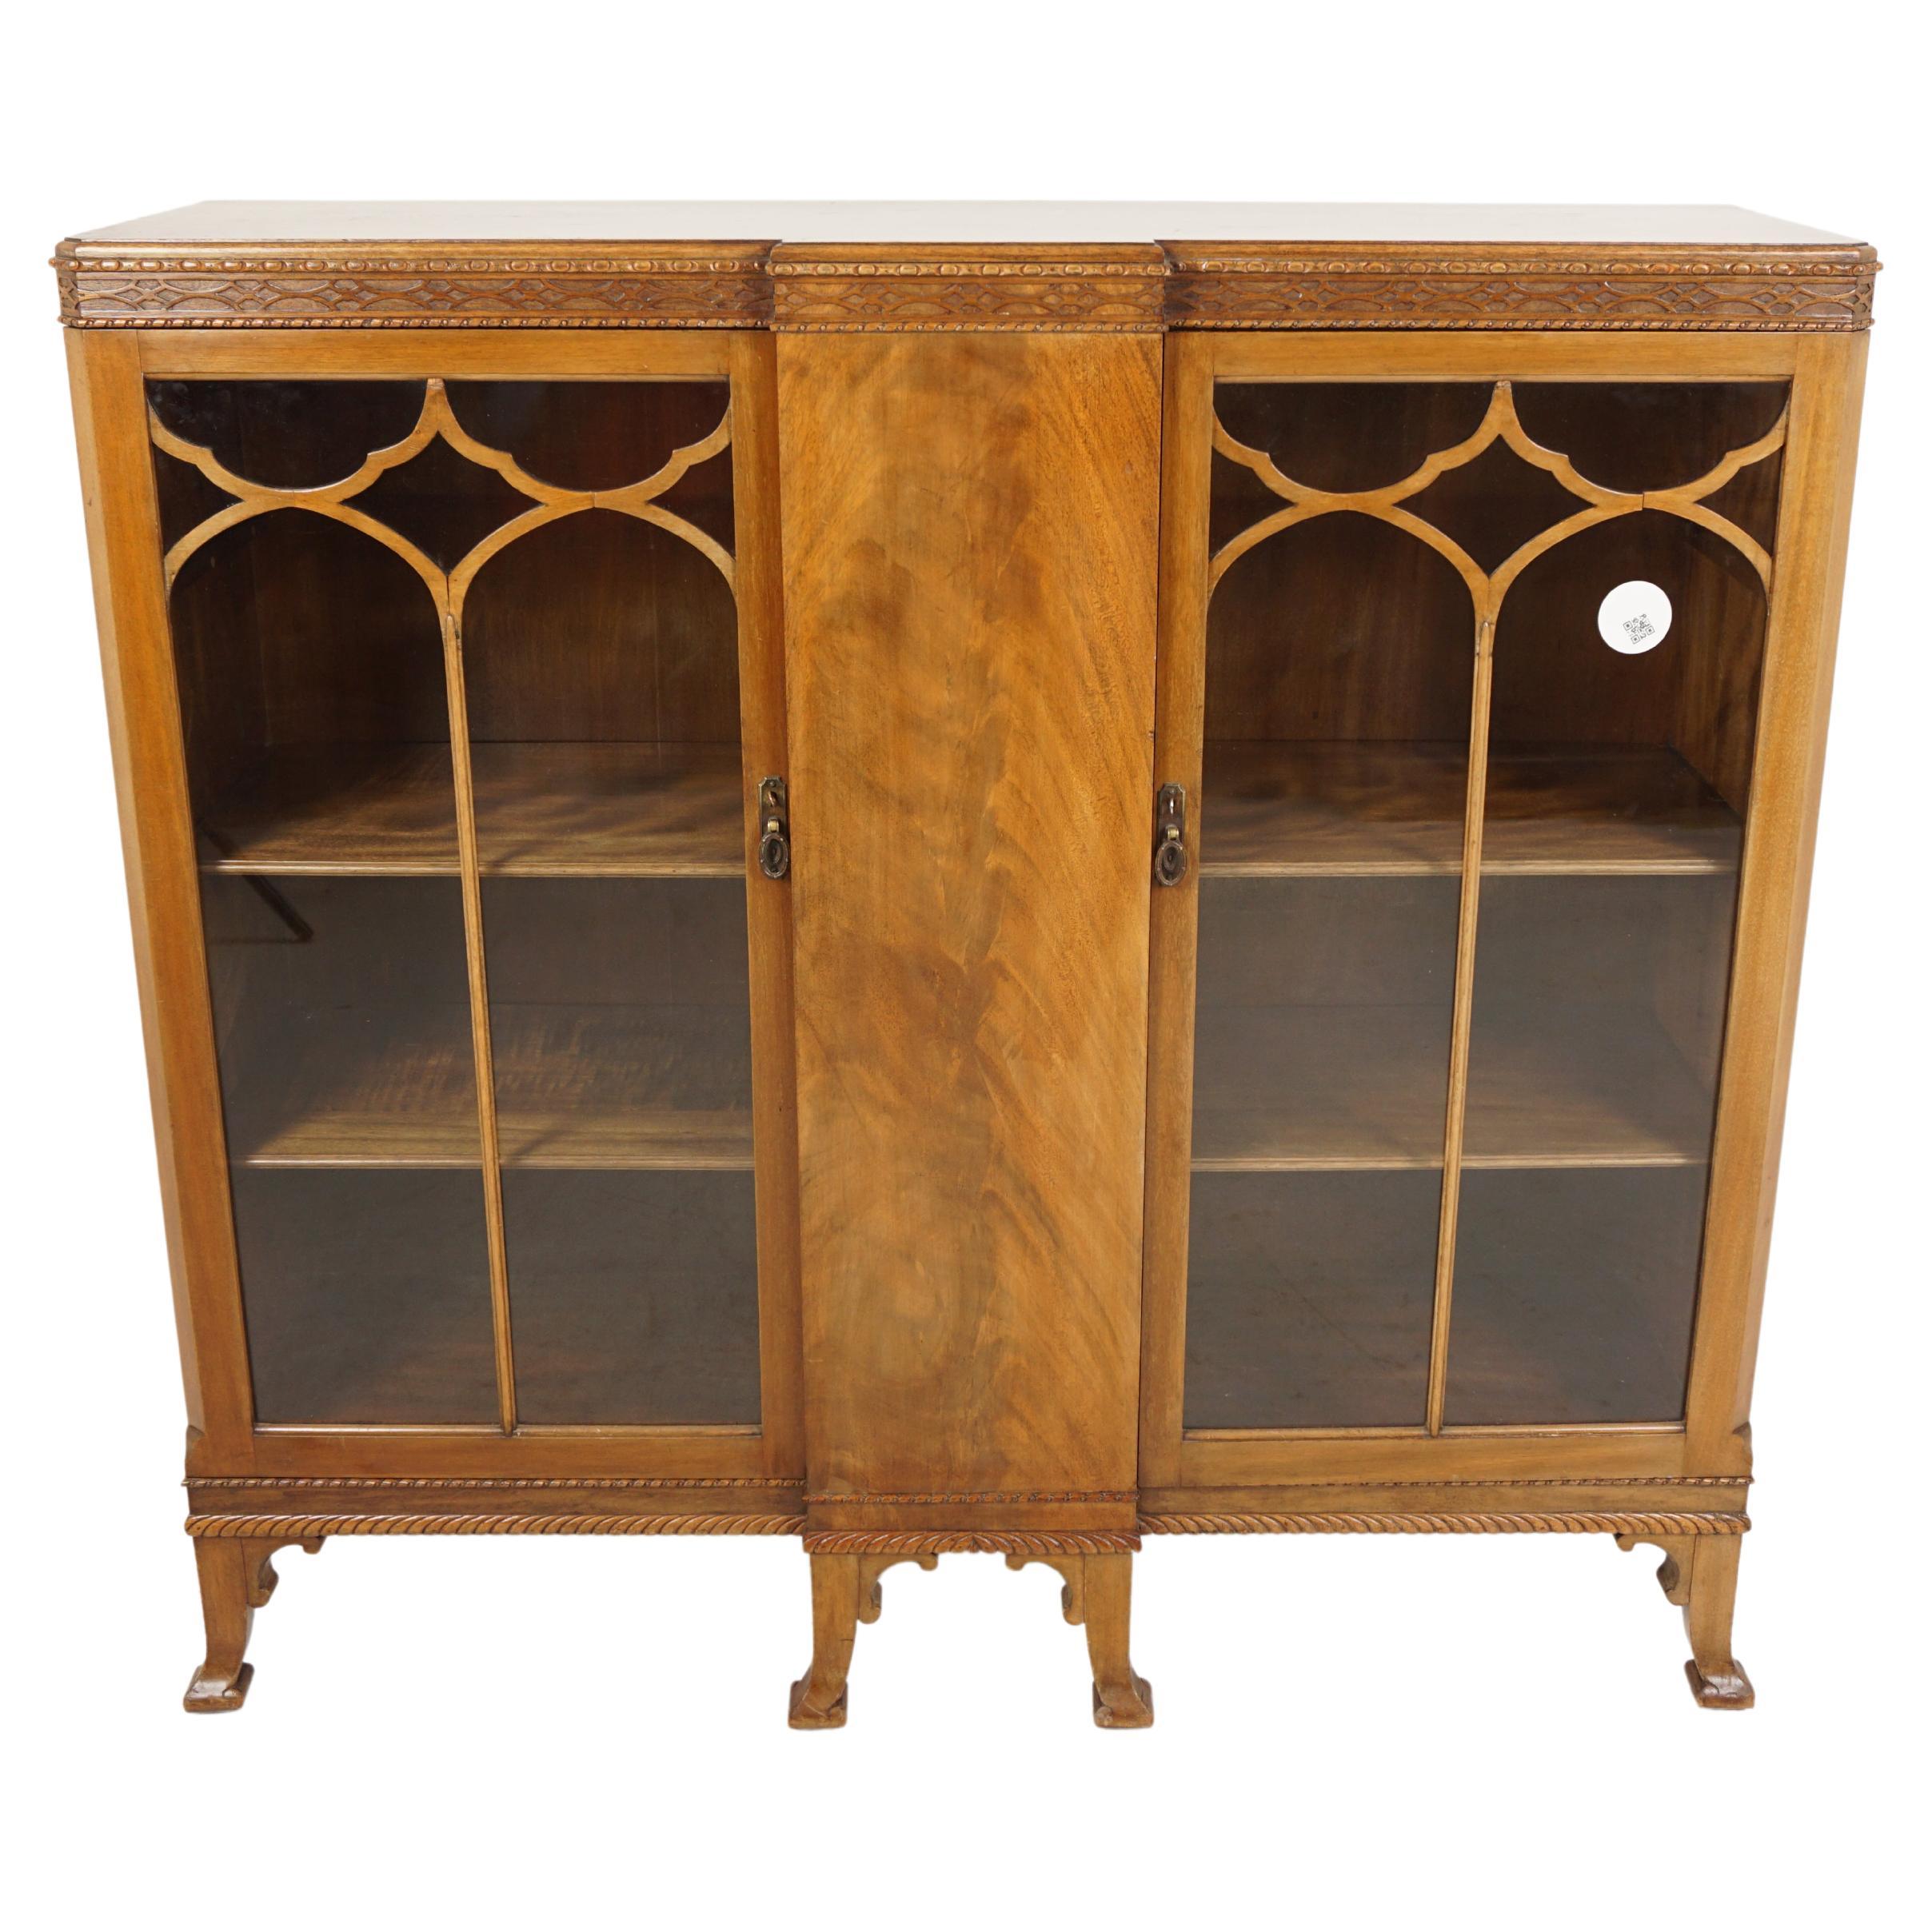 Two Door Walnut China Cabinet, Display Cabinet/Bookcase, Scotland 1930, H1004